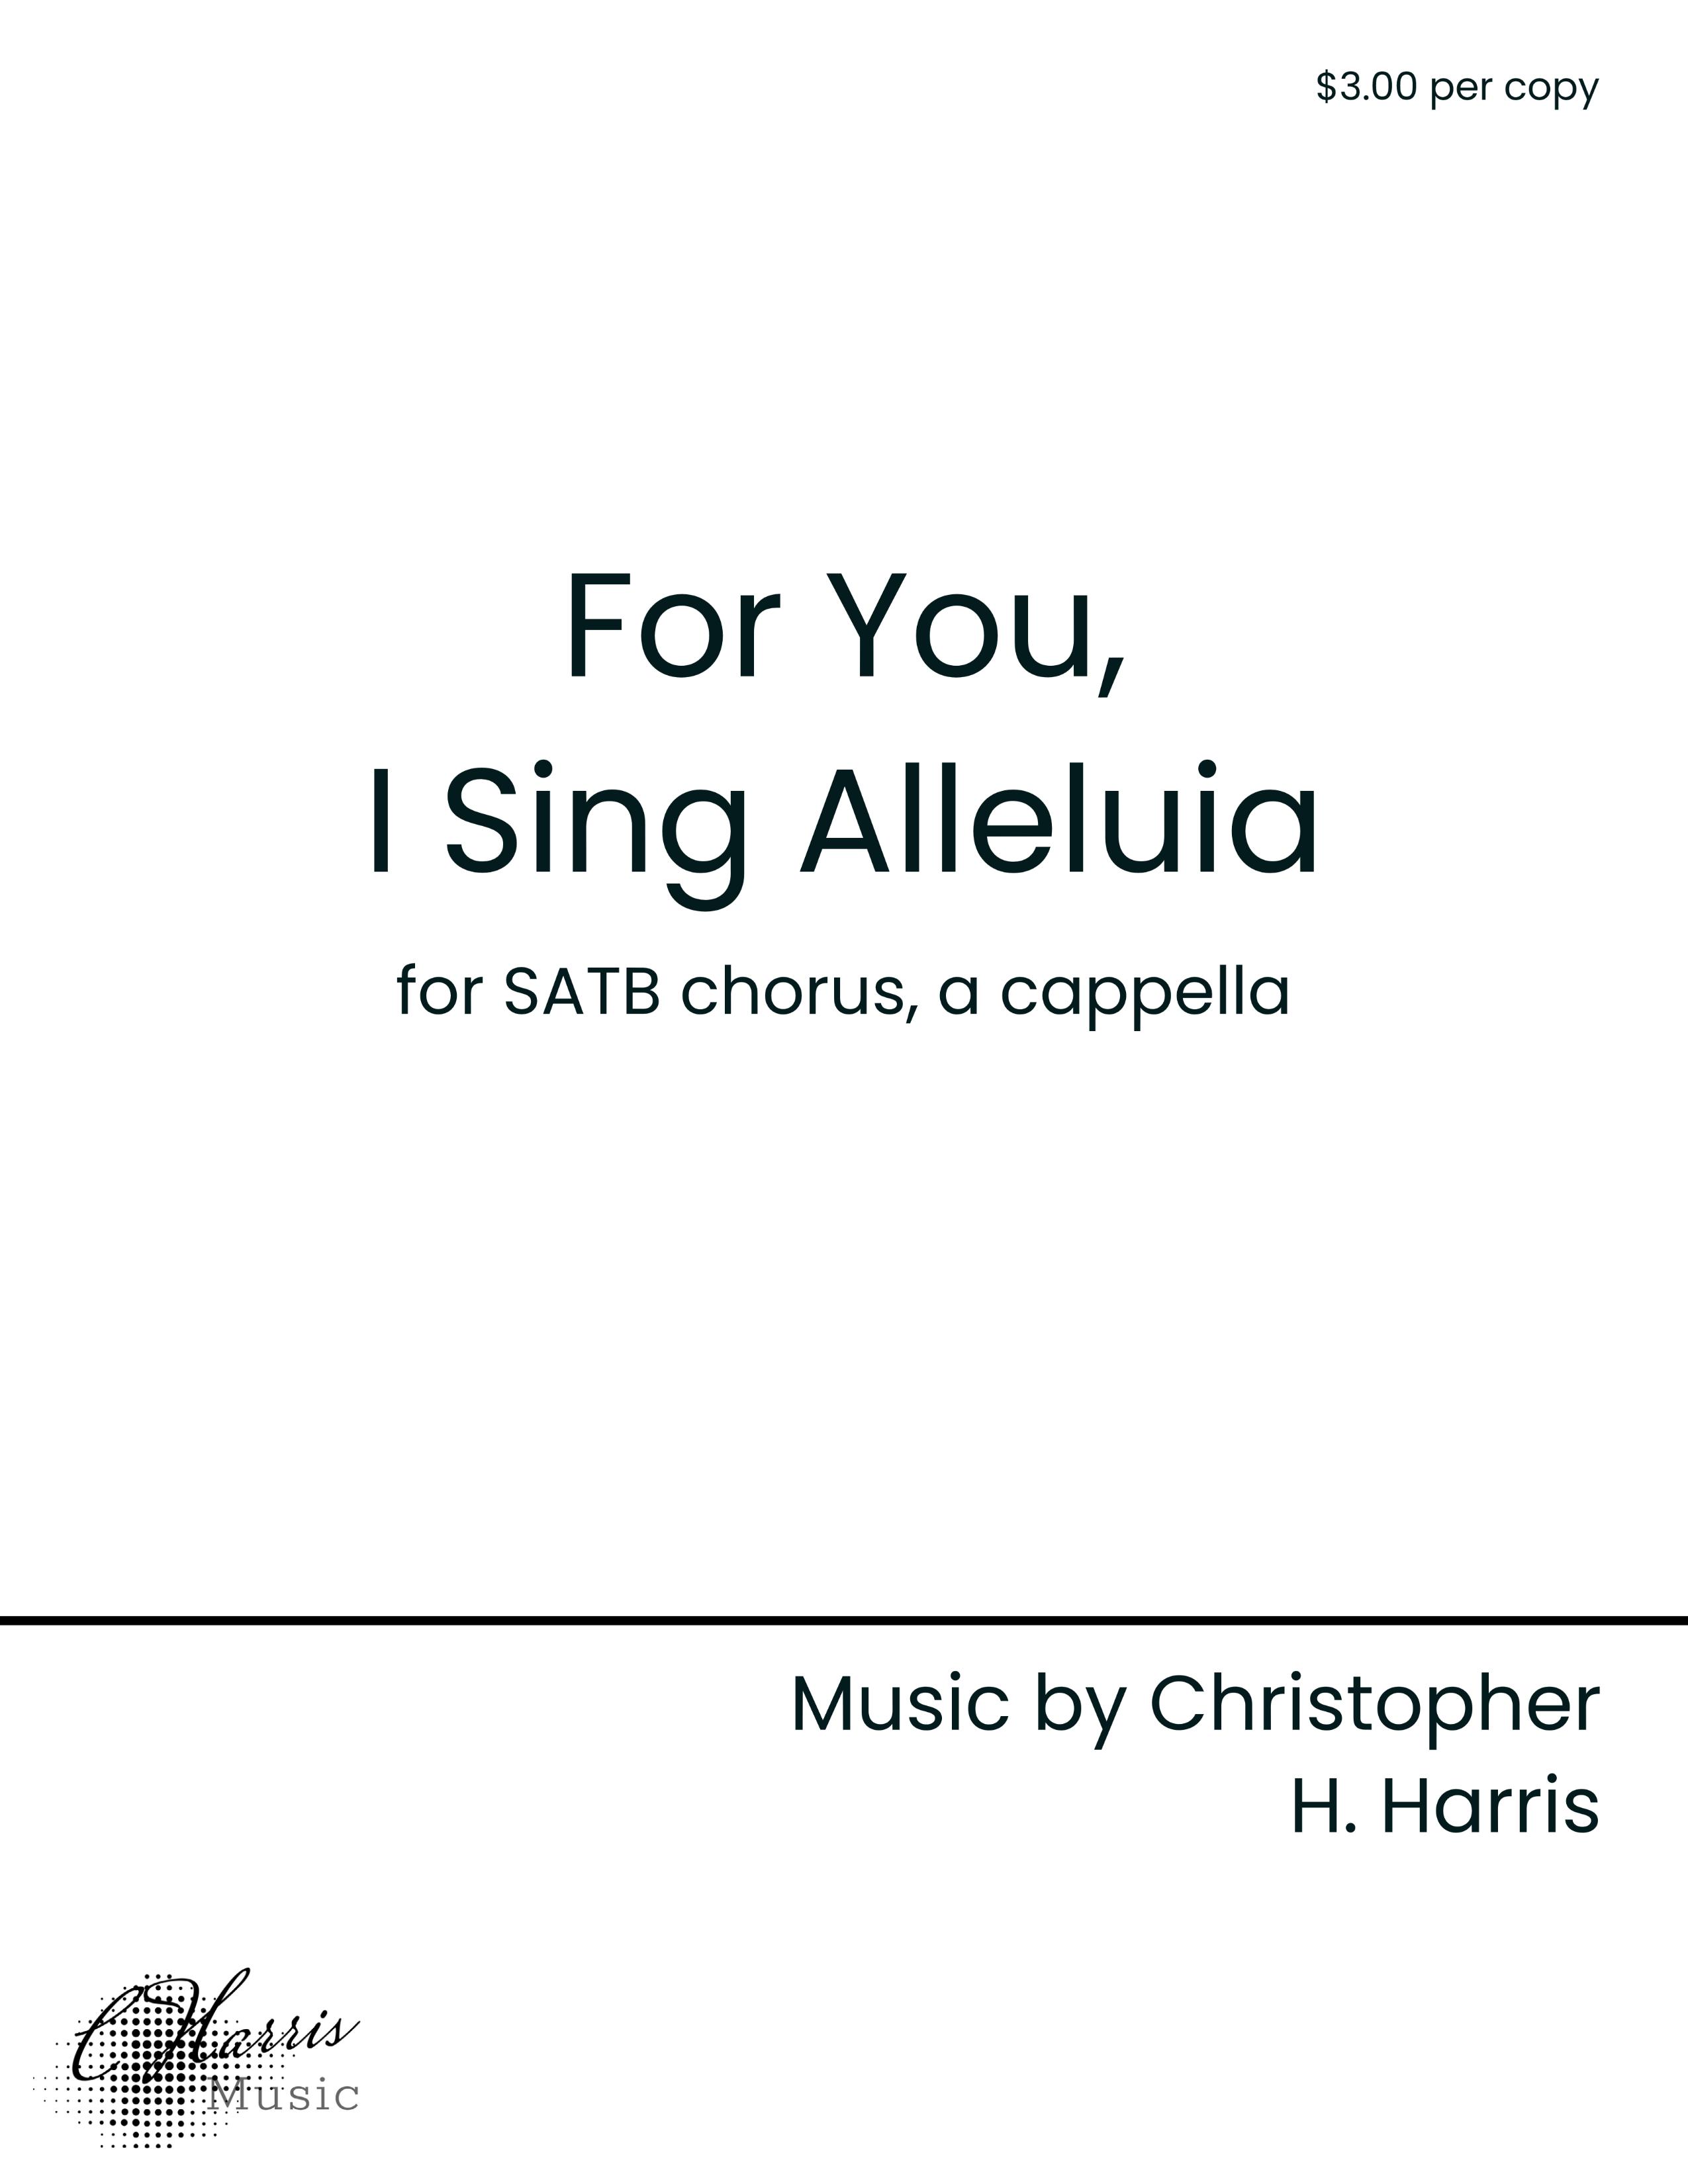 For You, I Sing Alleluia (SATB)